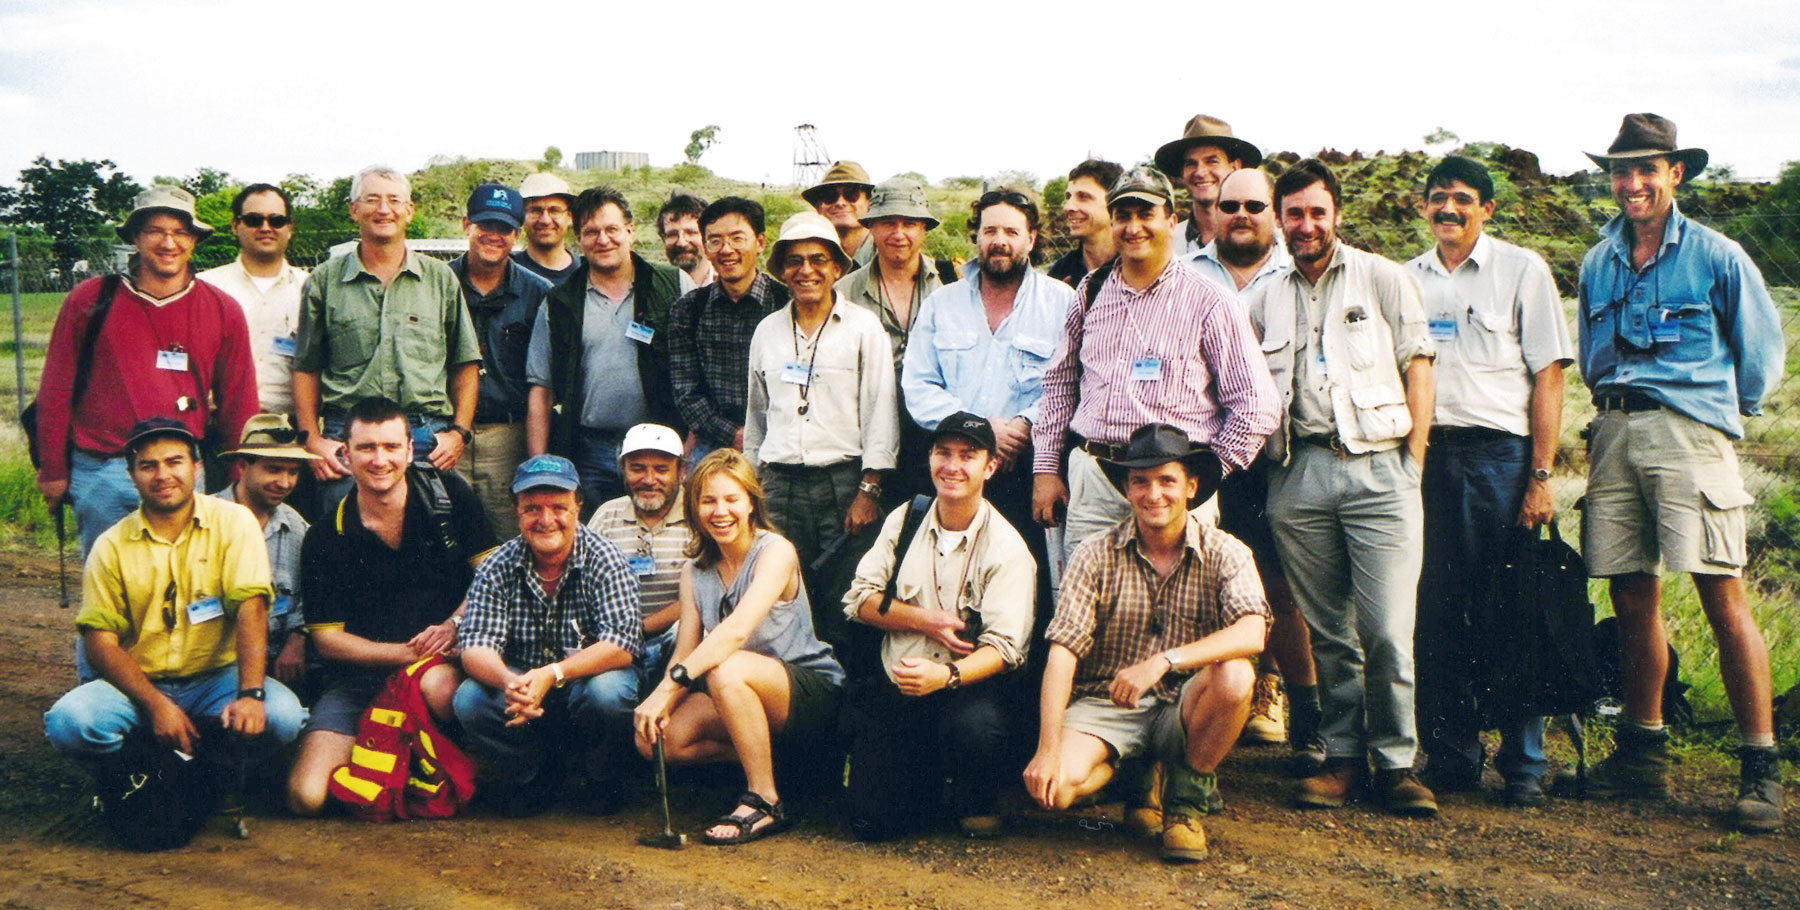 [Tour Group on the Cloncurry Workshop, Qld]